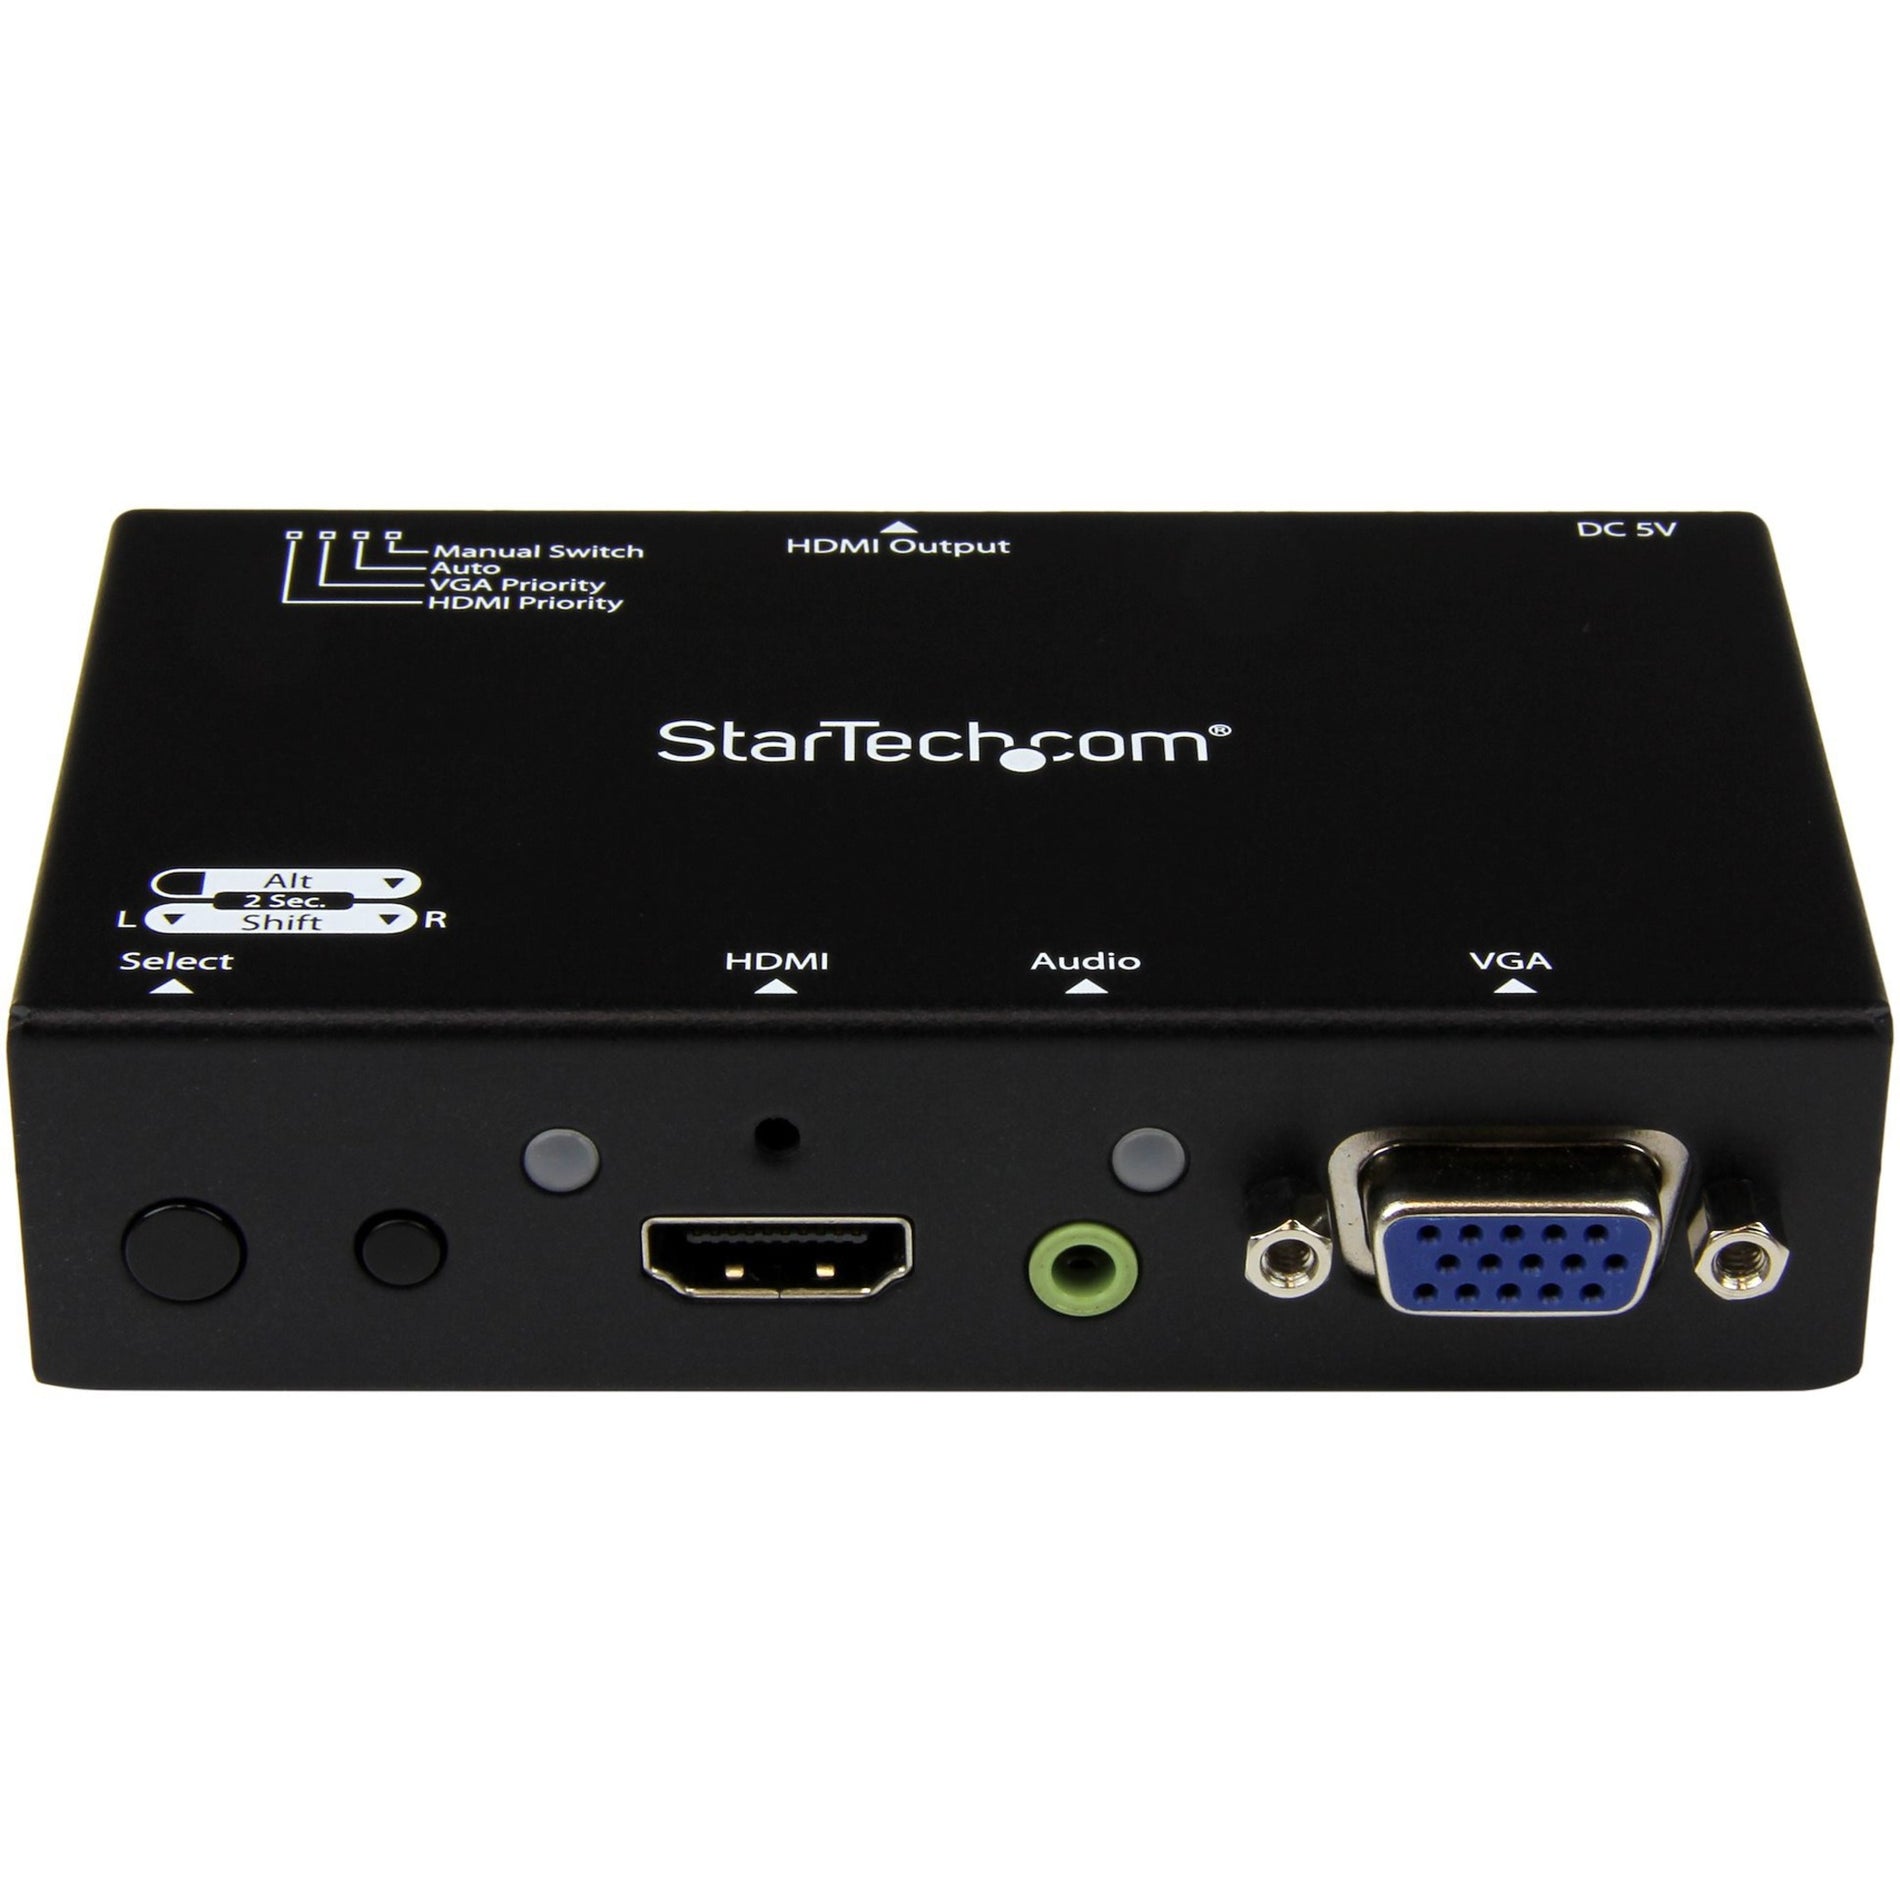 StarTech.com VS221VGA2HD 2x1 HDMI + VGA to HDMI Converter Switch w/ Automatic and Priority Switching, 1080p